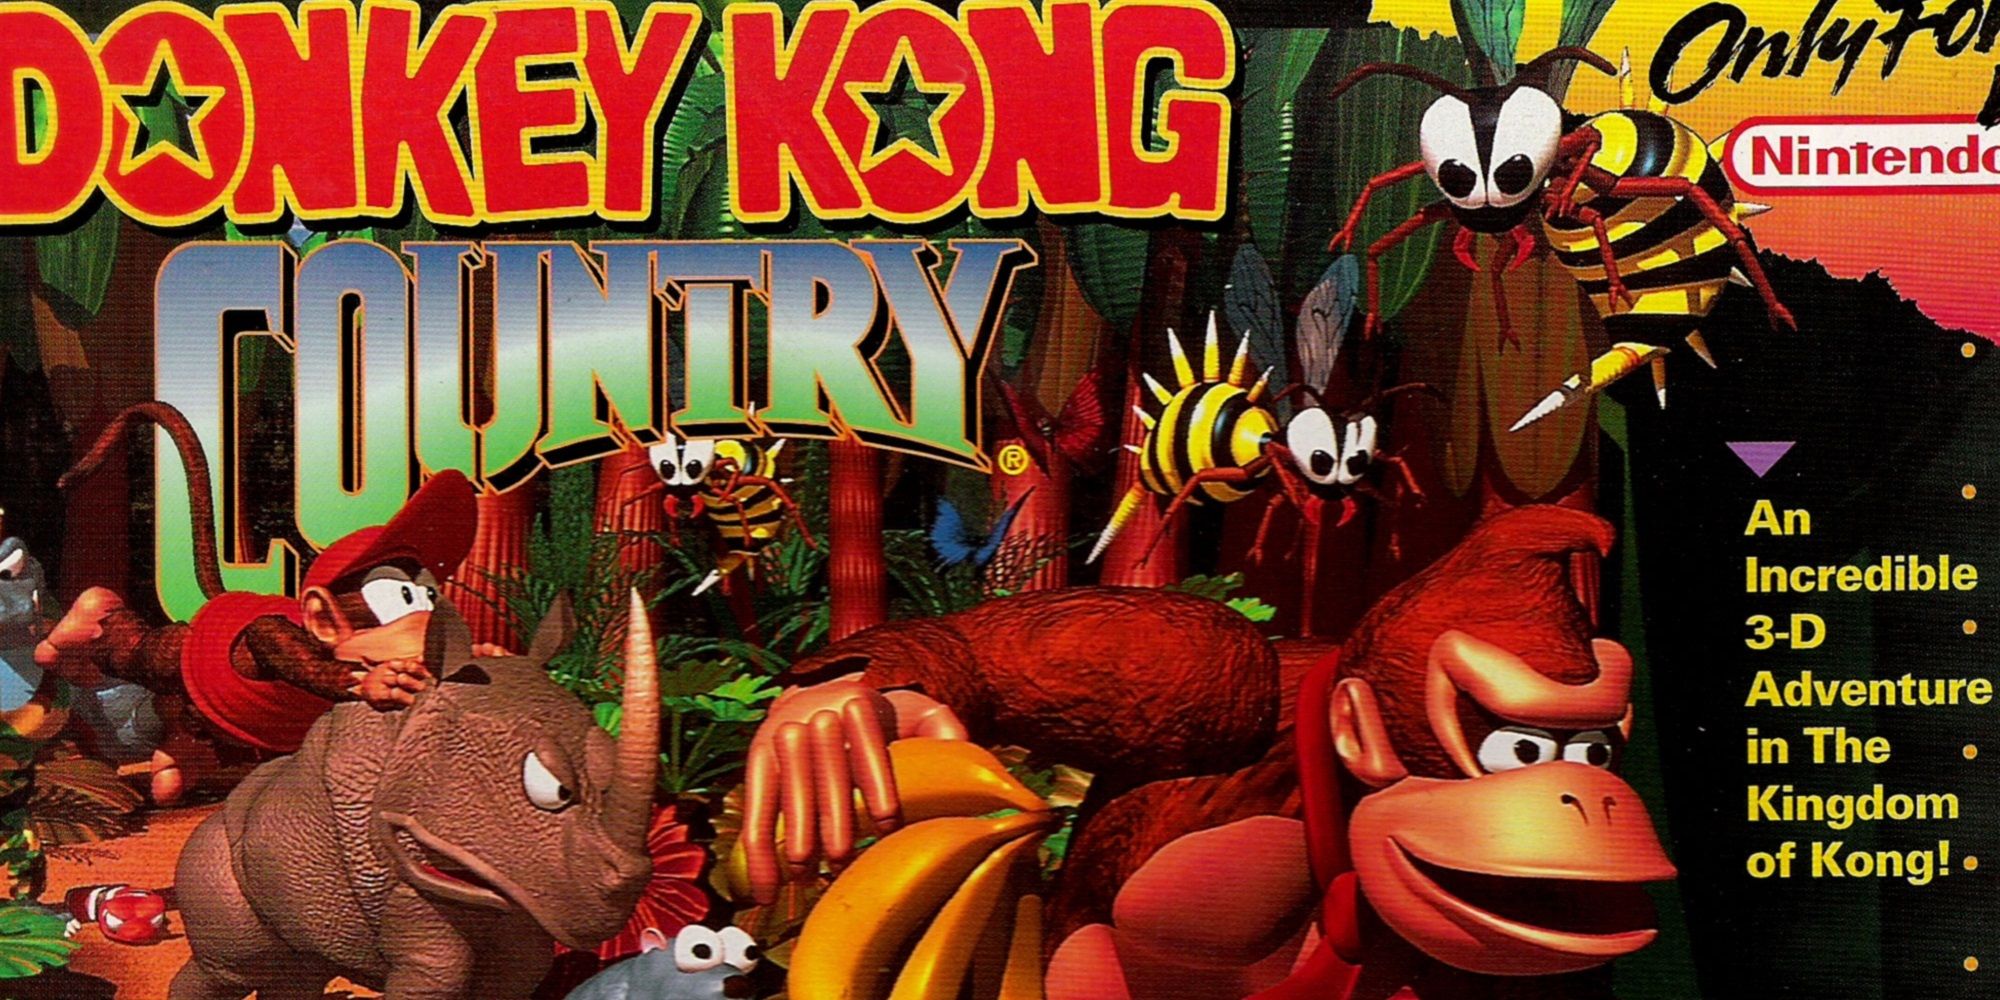 Donkey Kong and Diddy Kong on the Donkey Kong Country box art